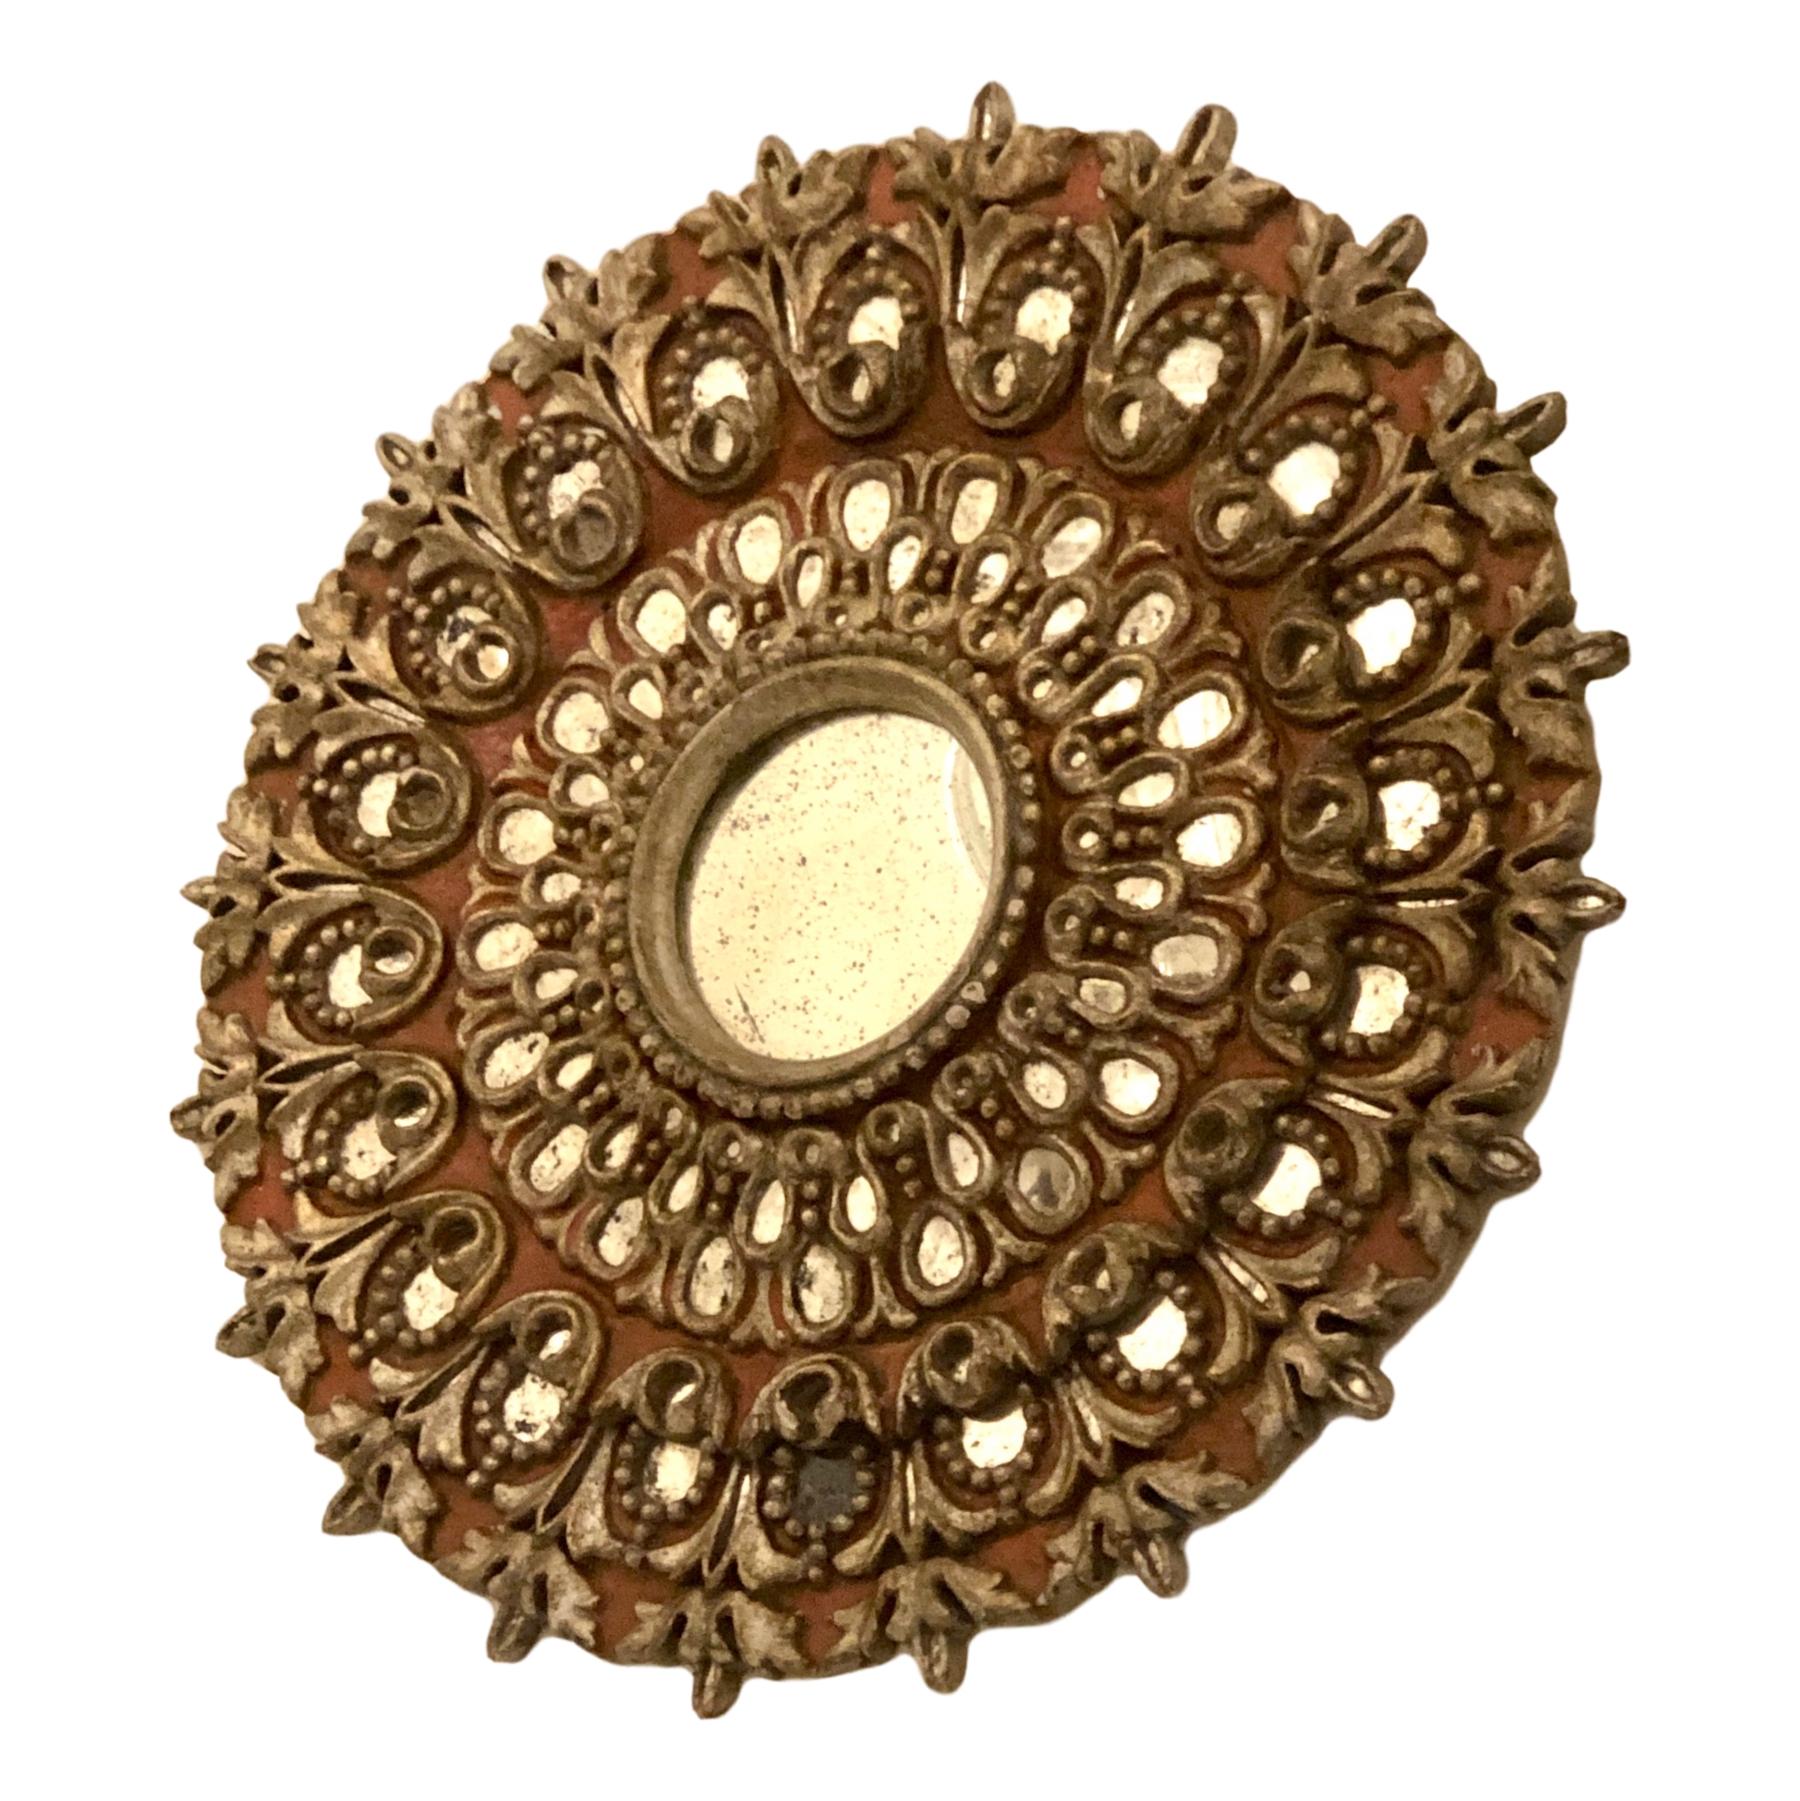 A circa 1940's silver-leaf Italian polychromed mirror with mirror insets.

Measurements:
Diameter: 23.75